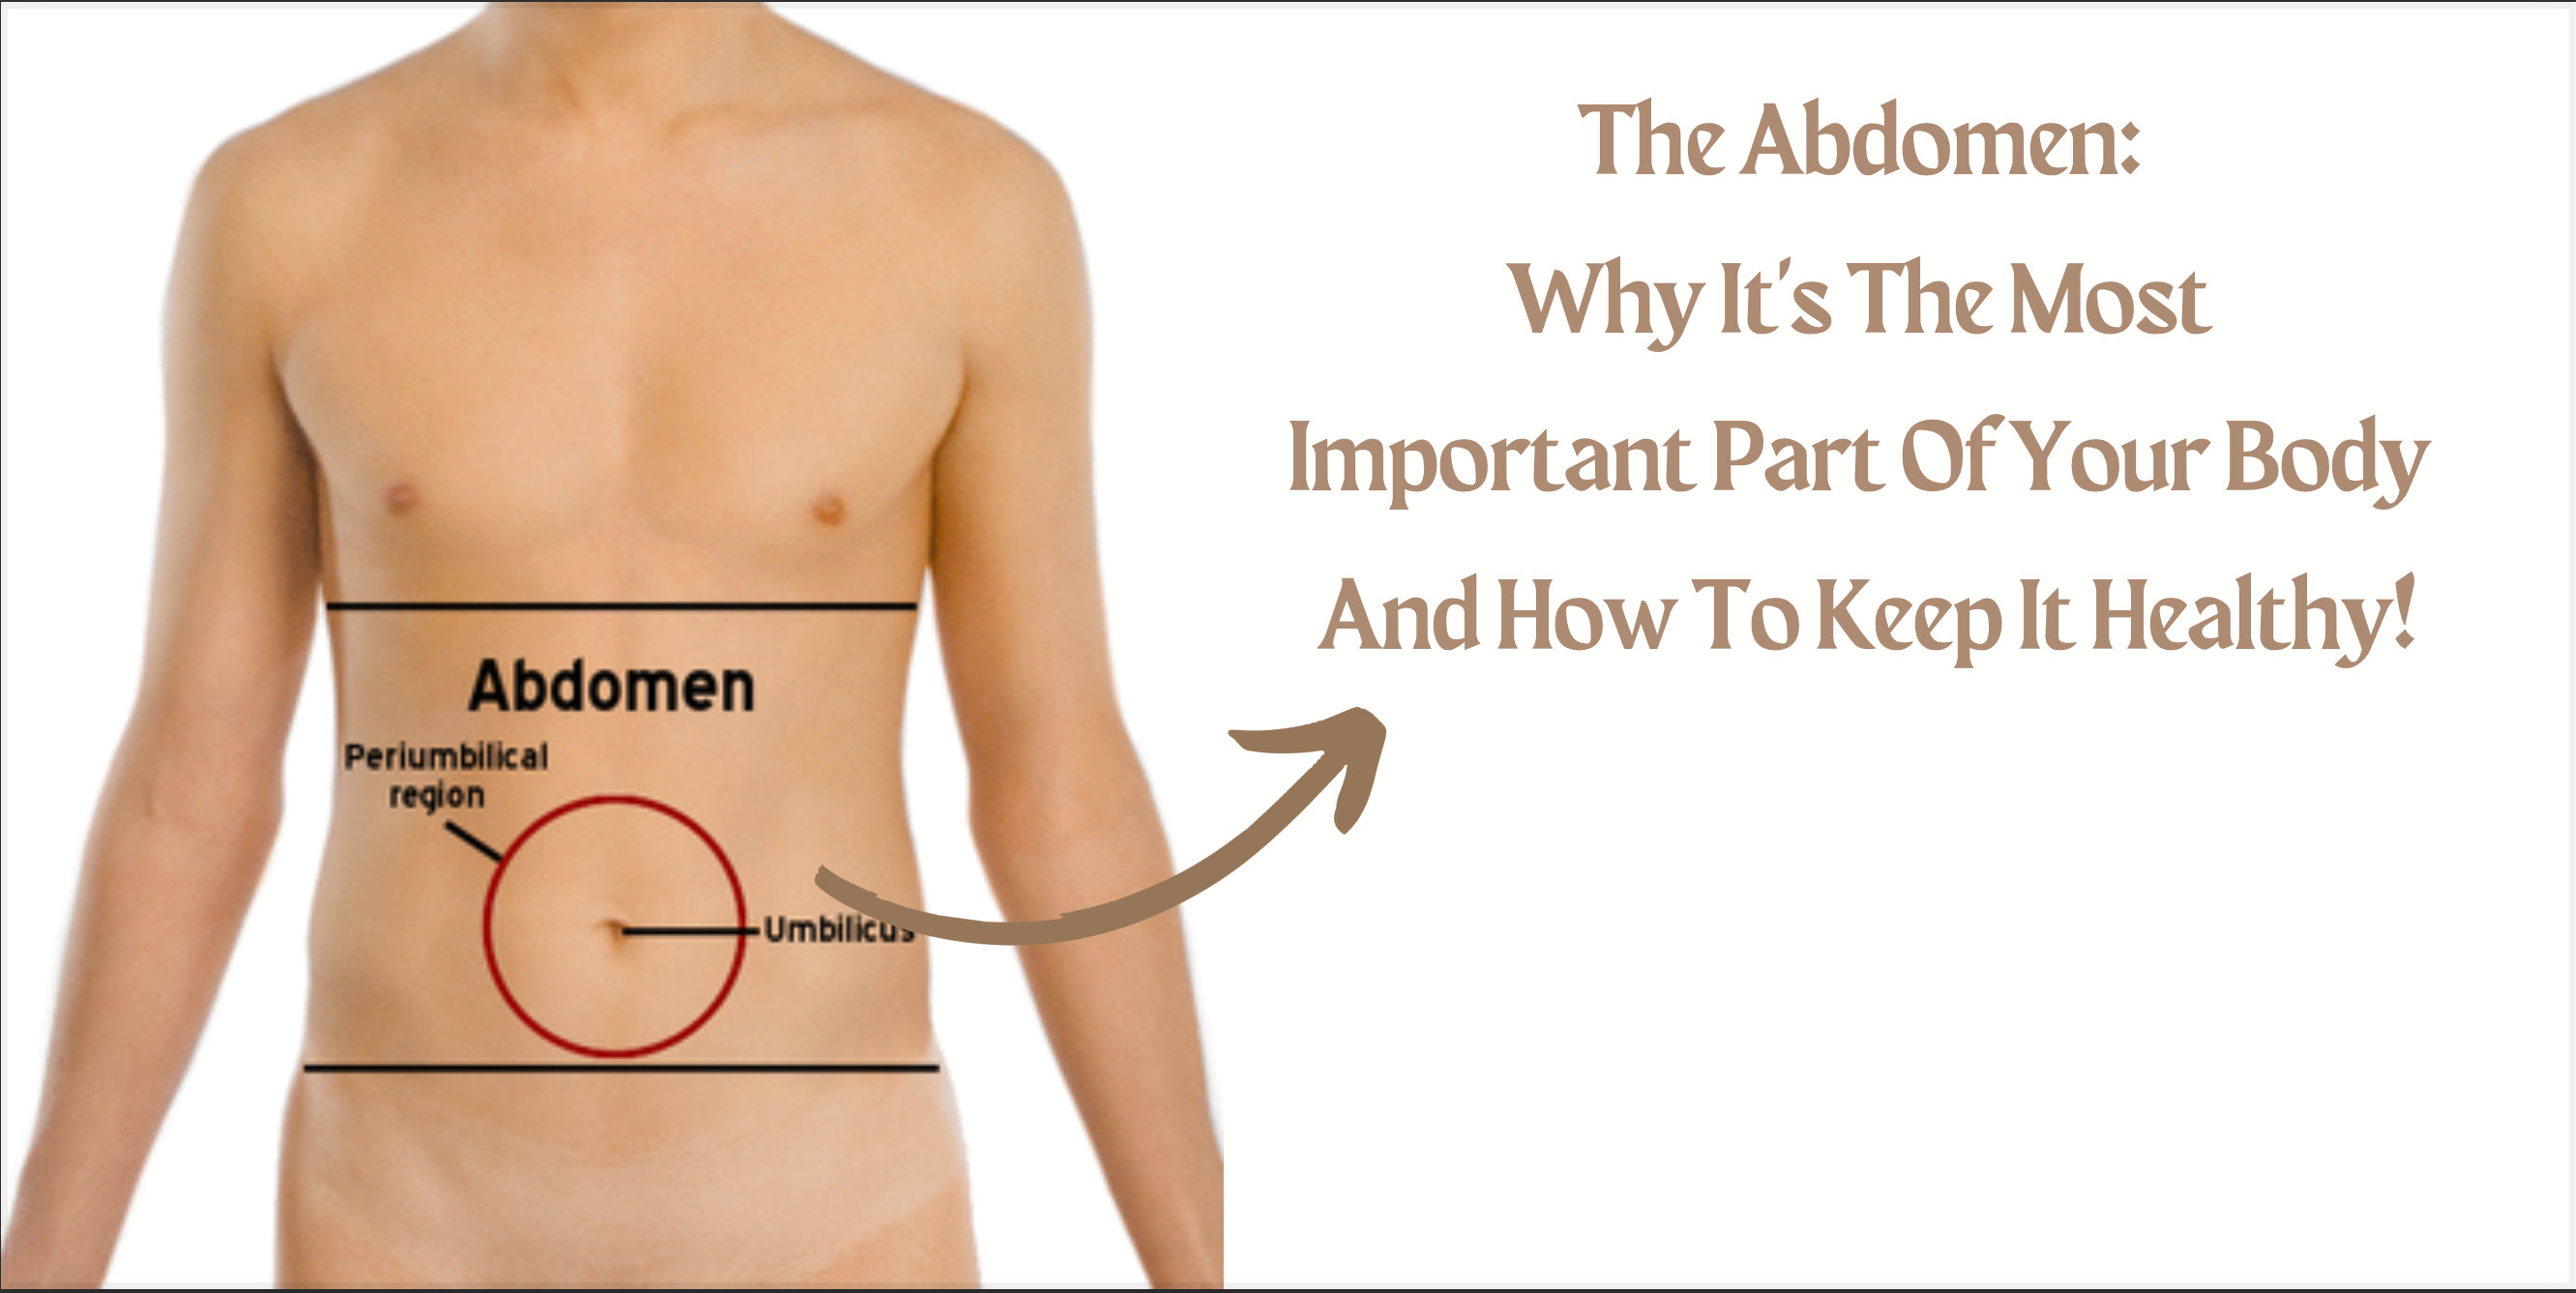 The Abdomen: Why It’s The Most Important Part Of Your Body And How To Keep It Healthy